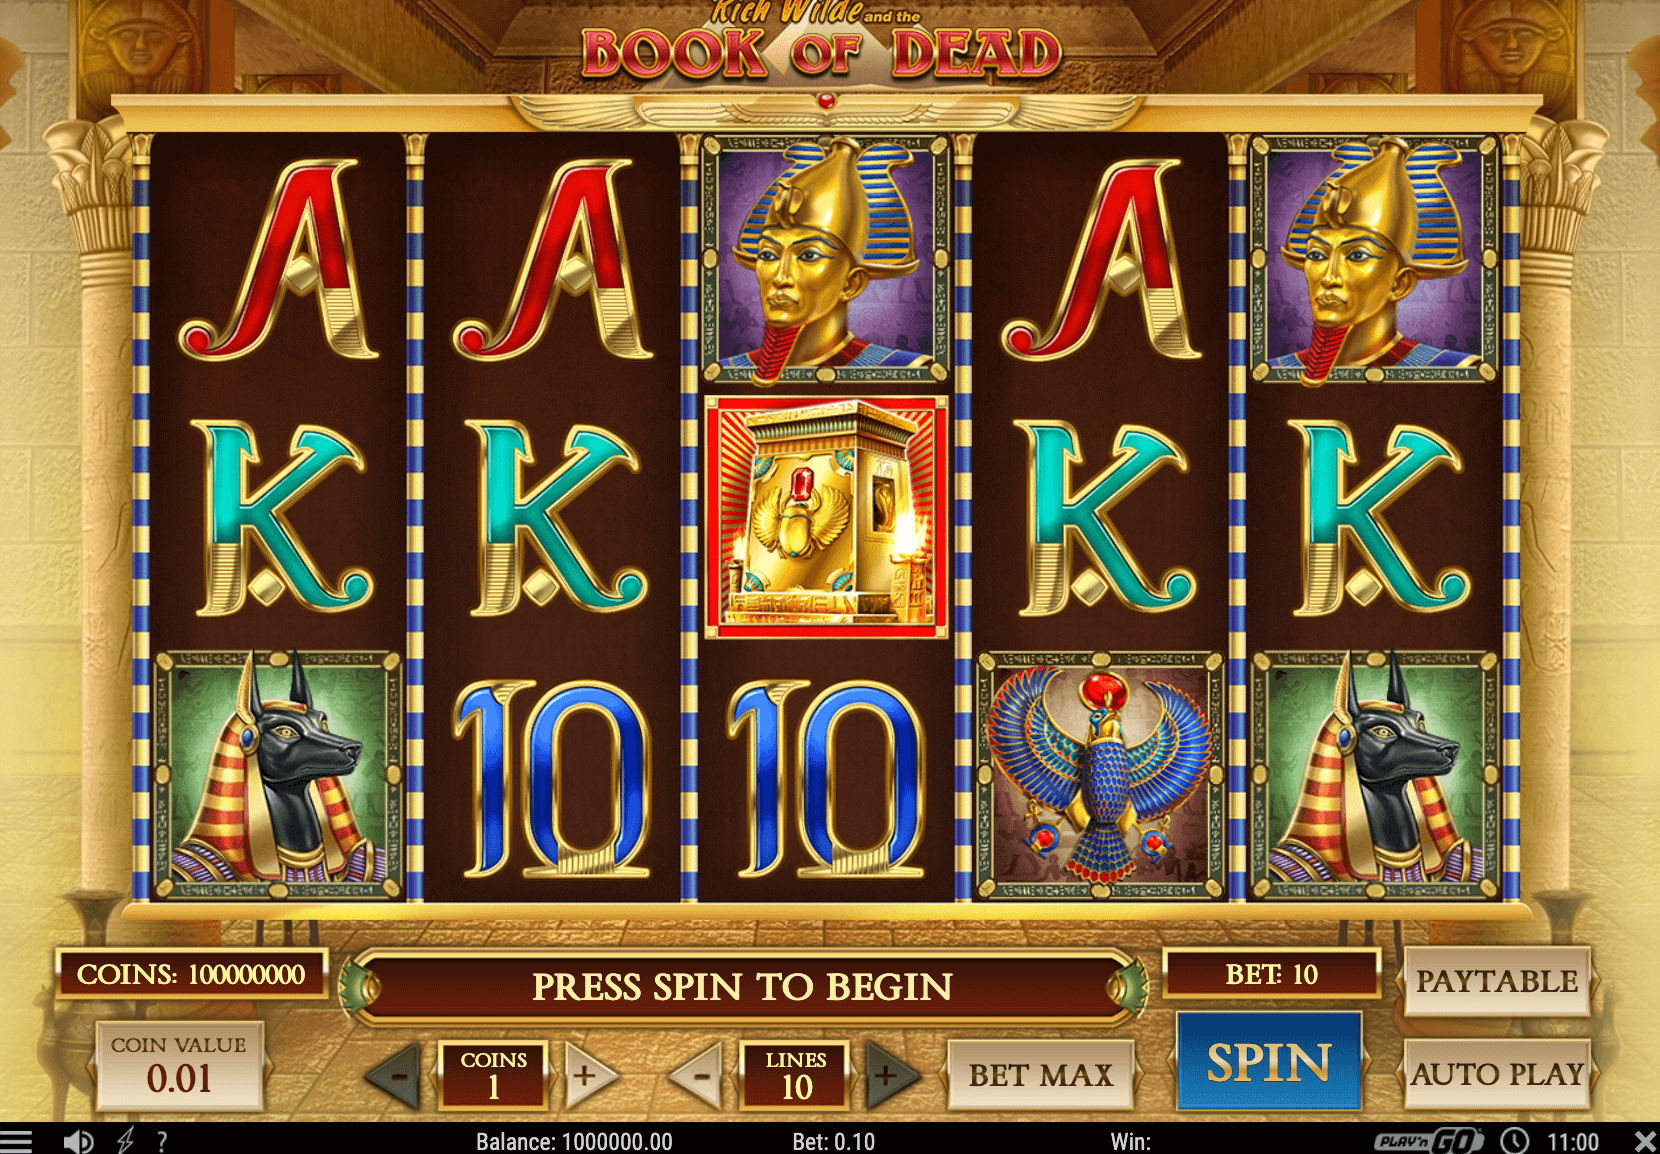 Rich Wilde and the Book of Dead slot theme